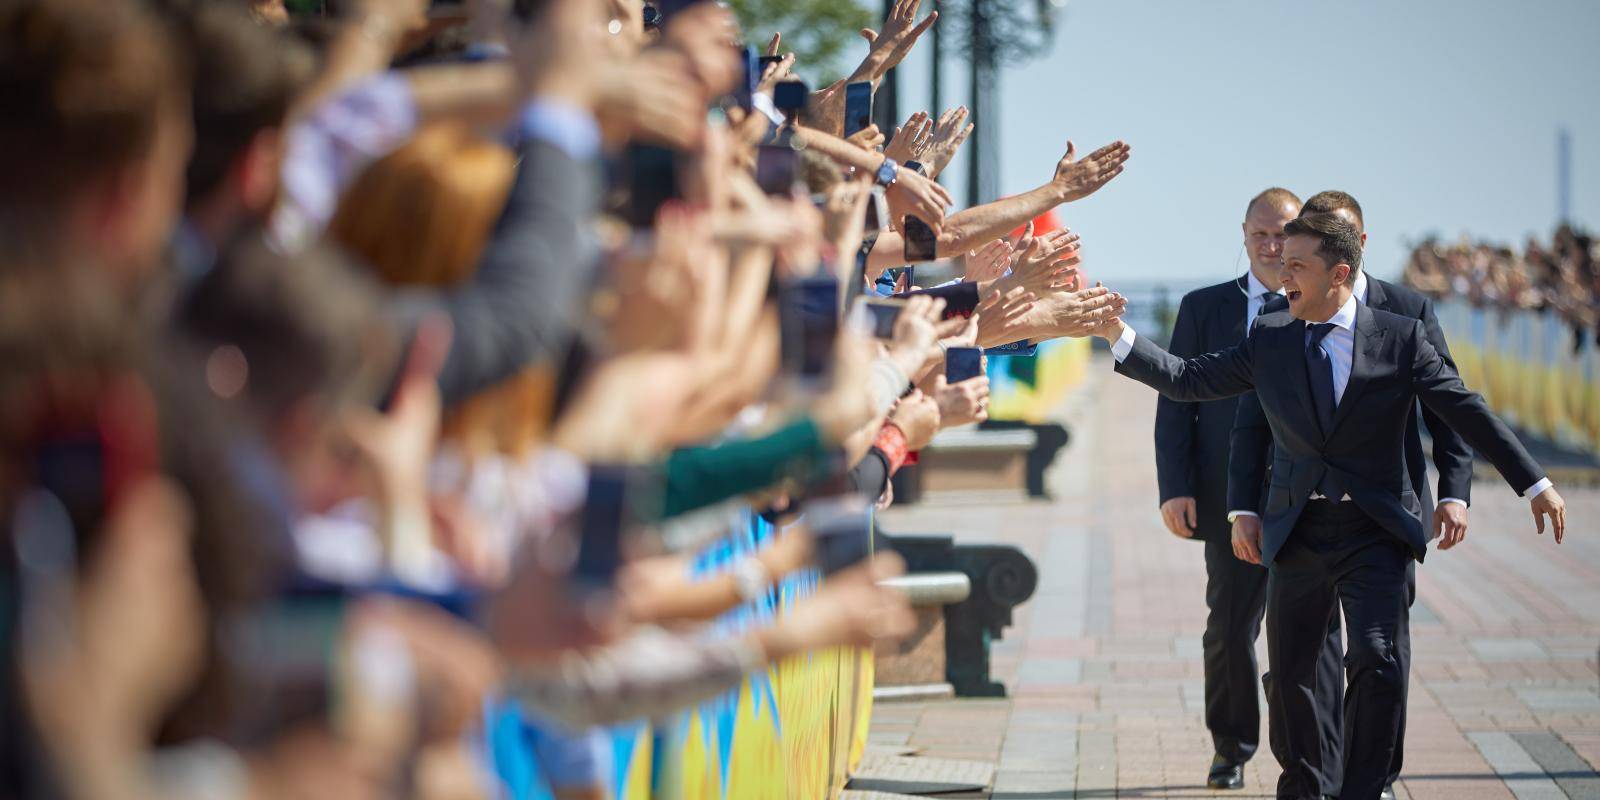 Image shows Volodymyr Zelenskyy greeting crowds in Kyiv on his way to be sworn in as president of Ukraine 